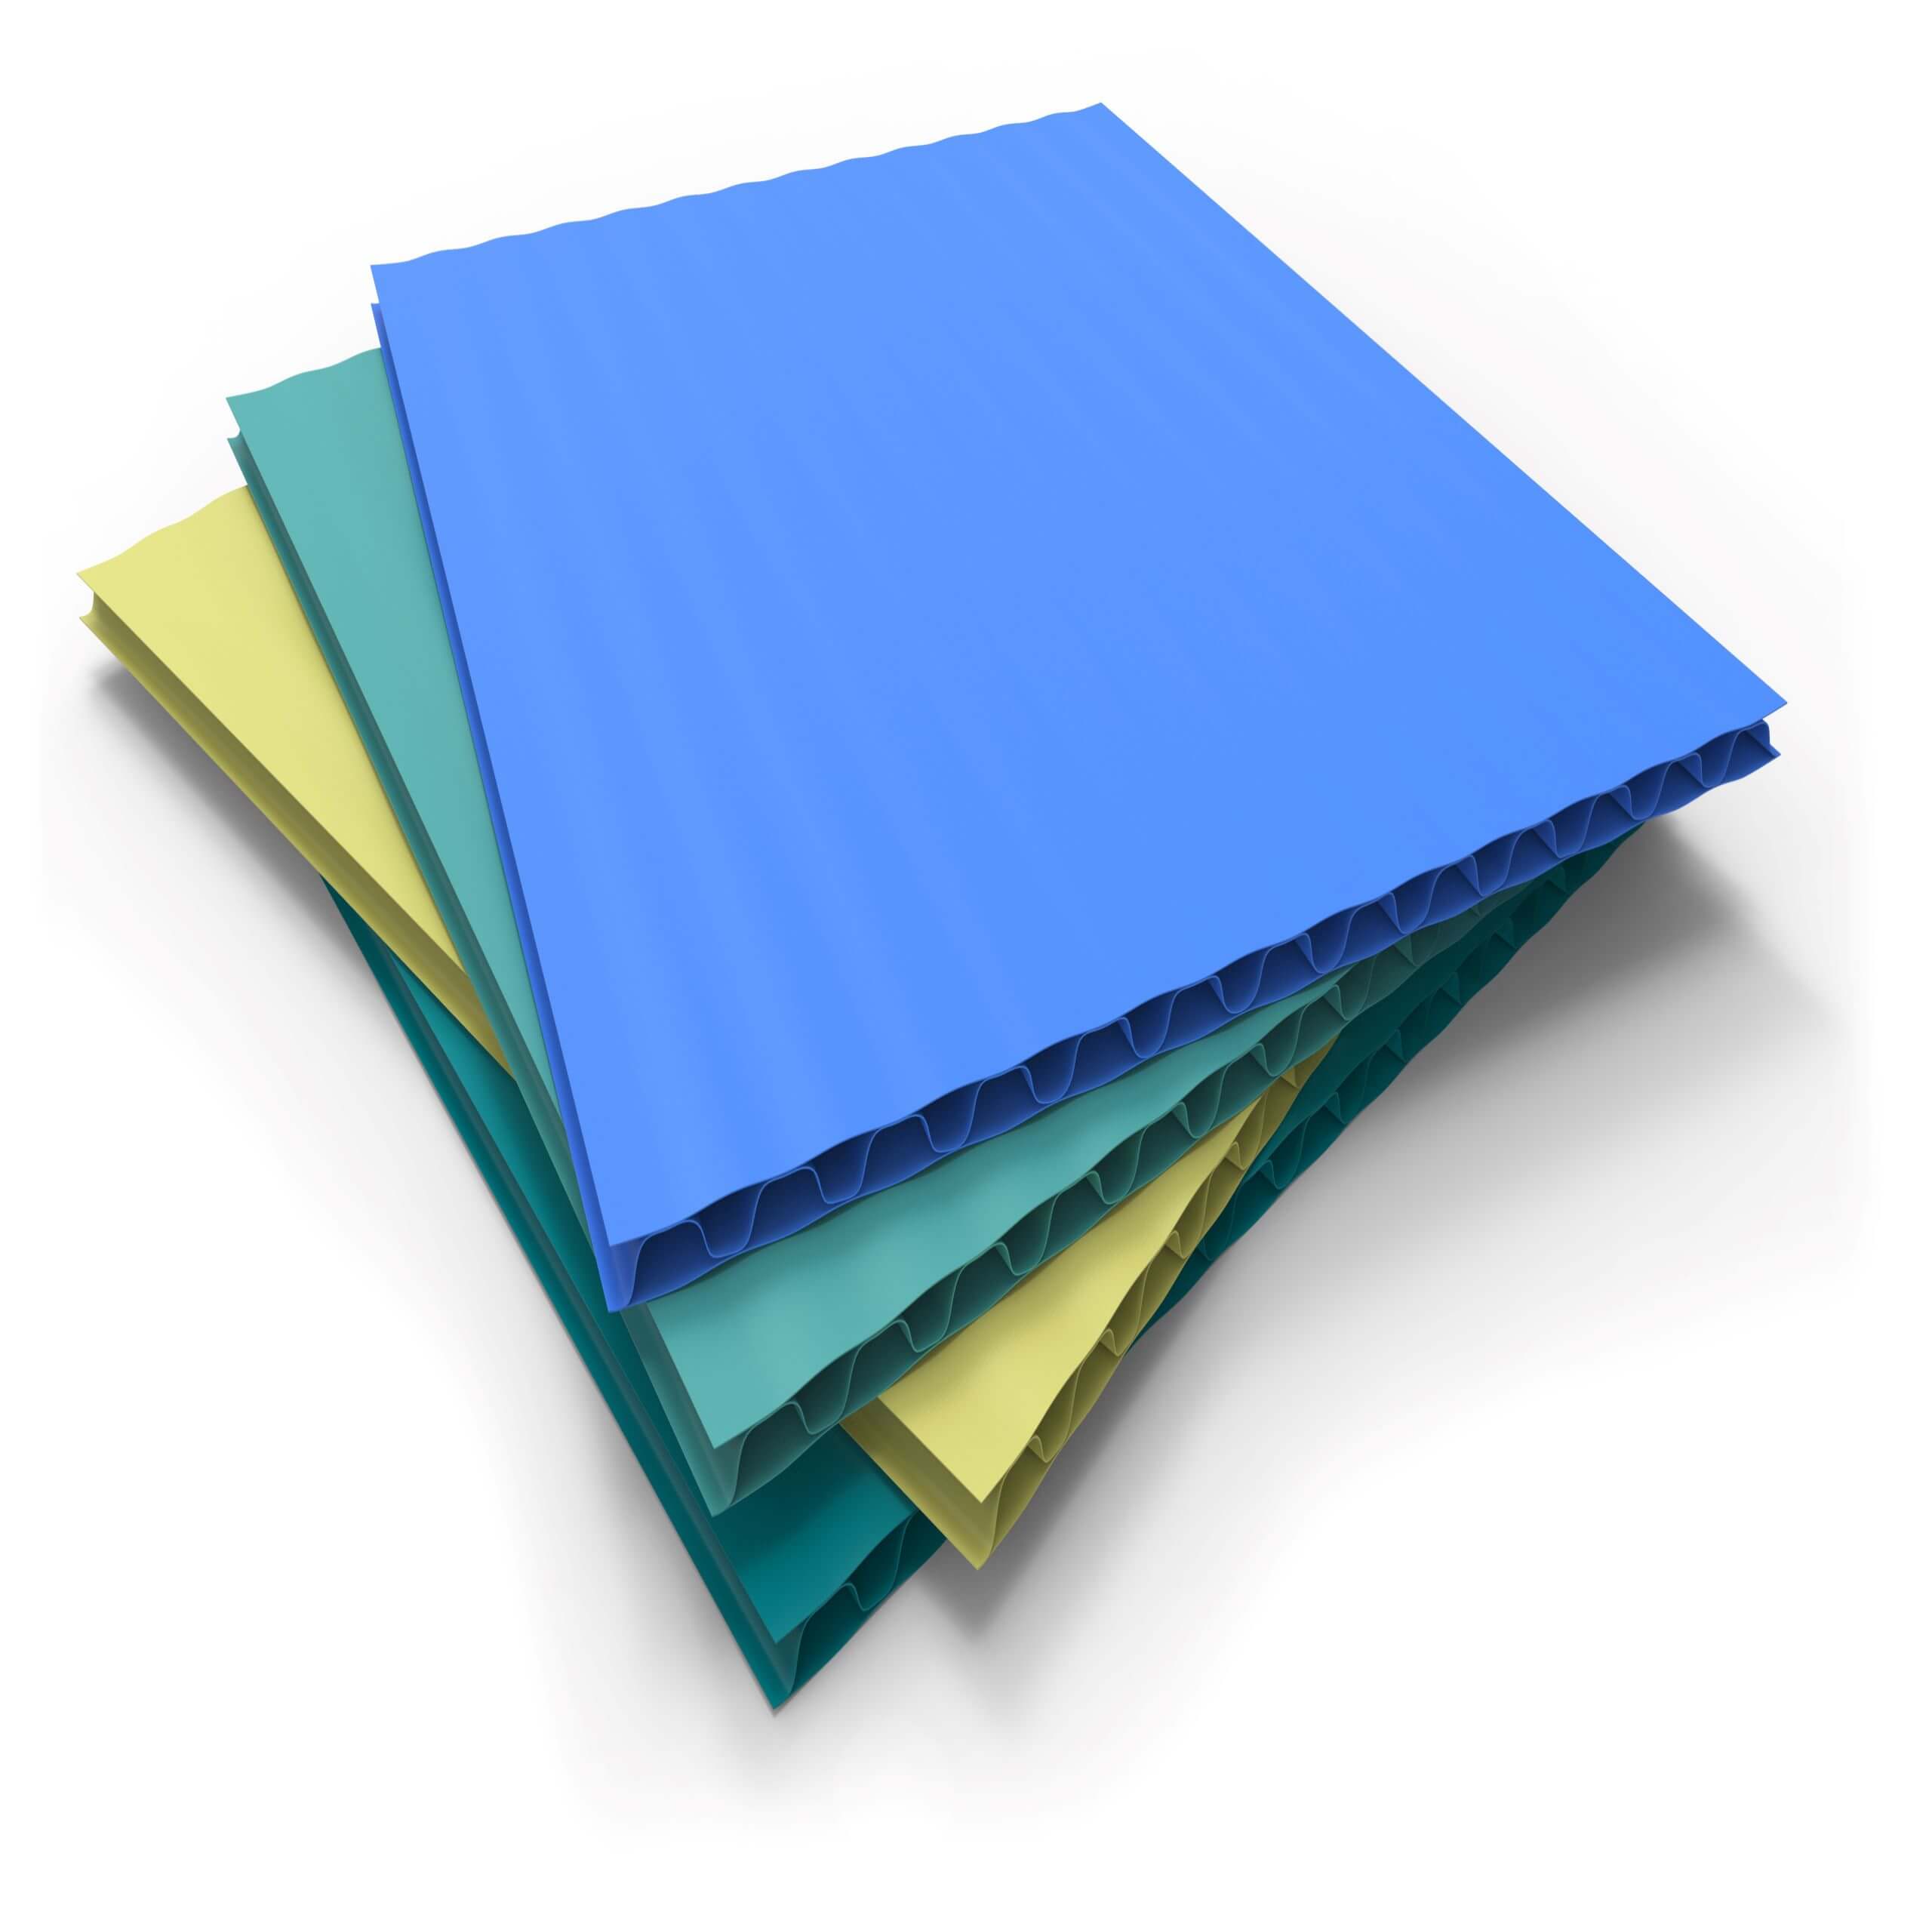 An image showing a pile of colourful corrugated plastic boards.